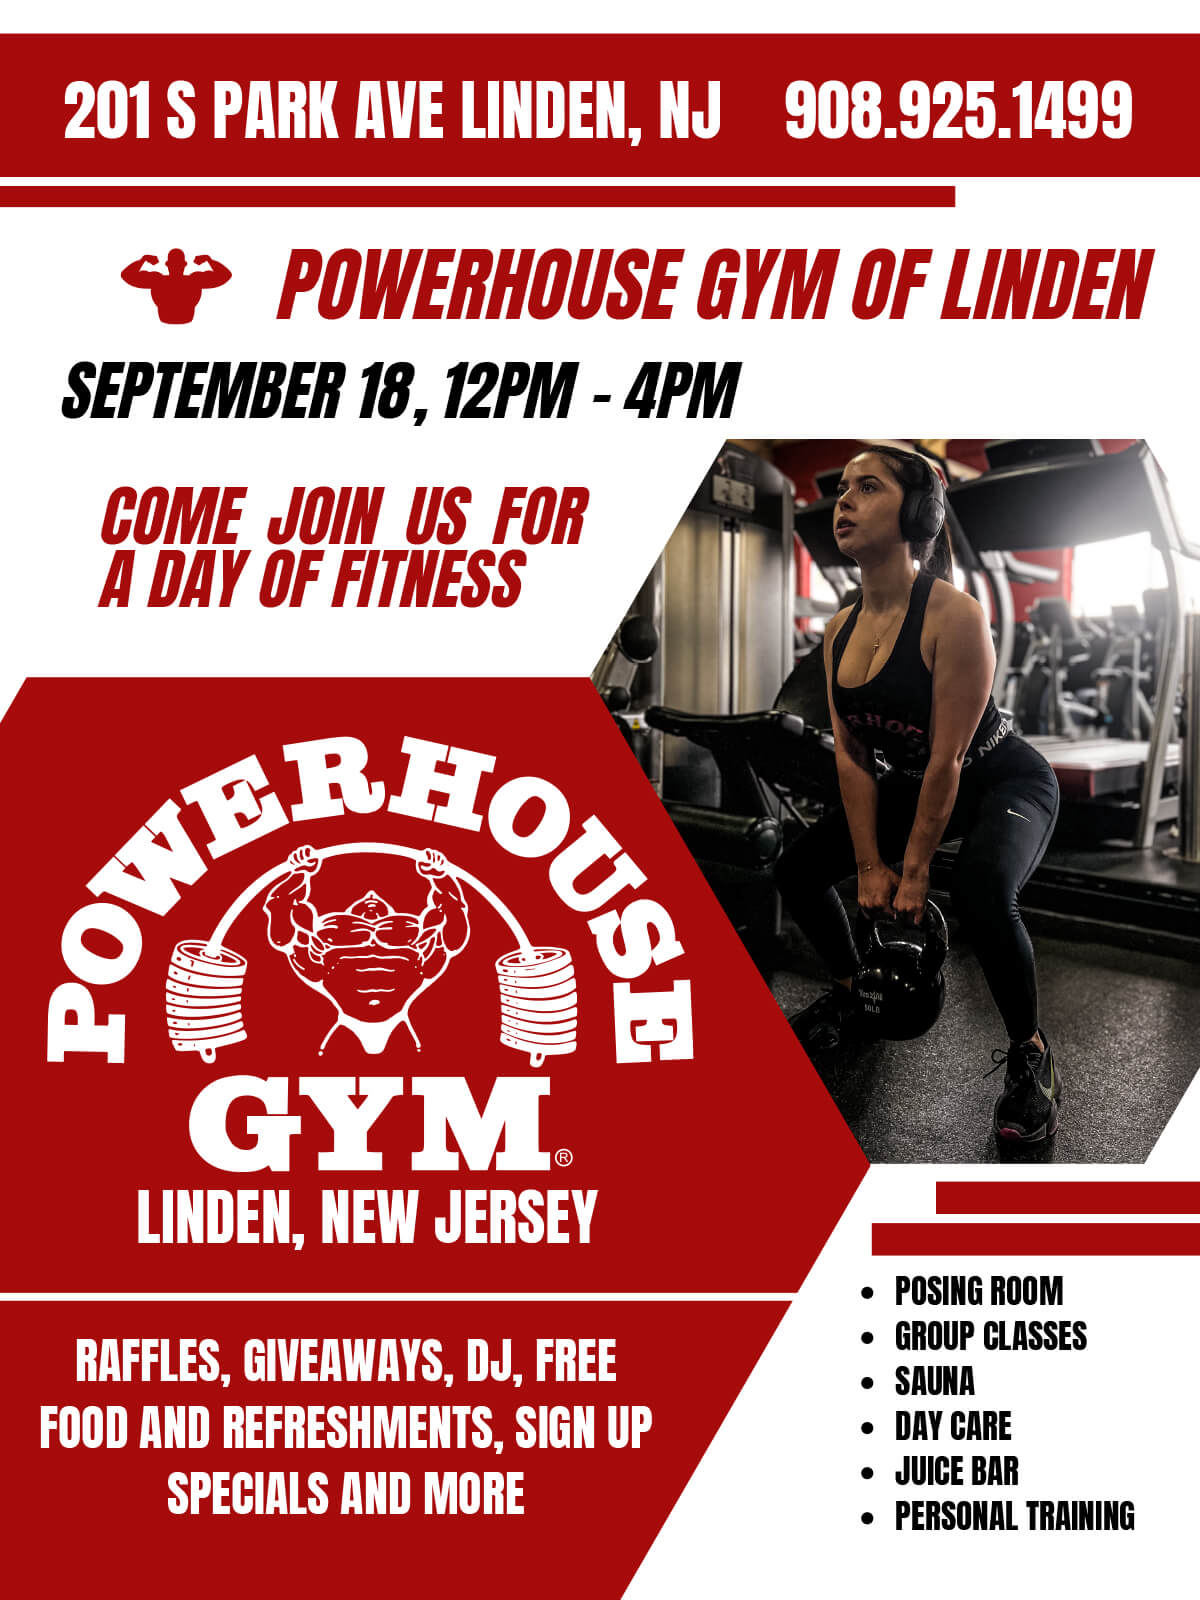 An Image of the Linden, NJ Powerhouse Gym Location